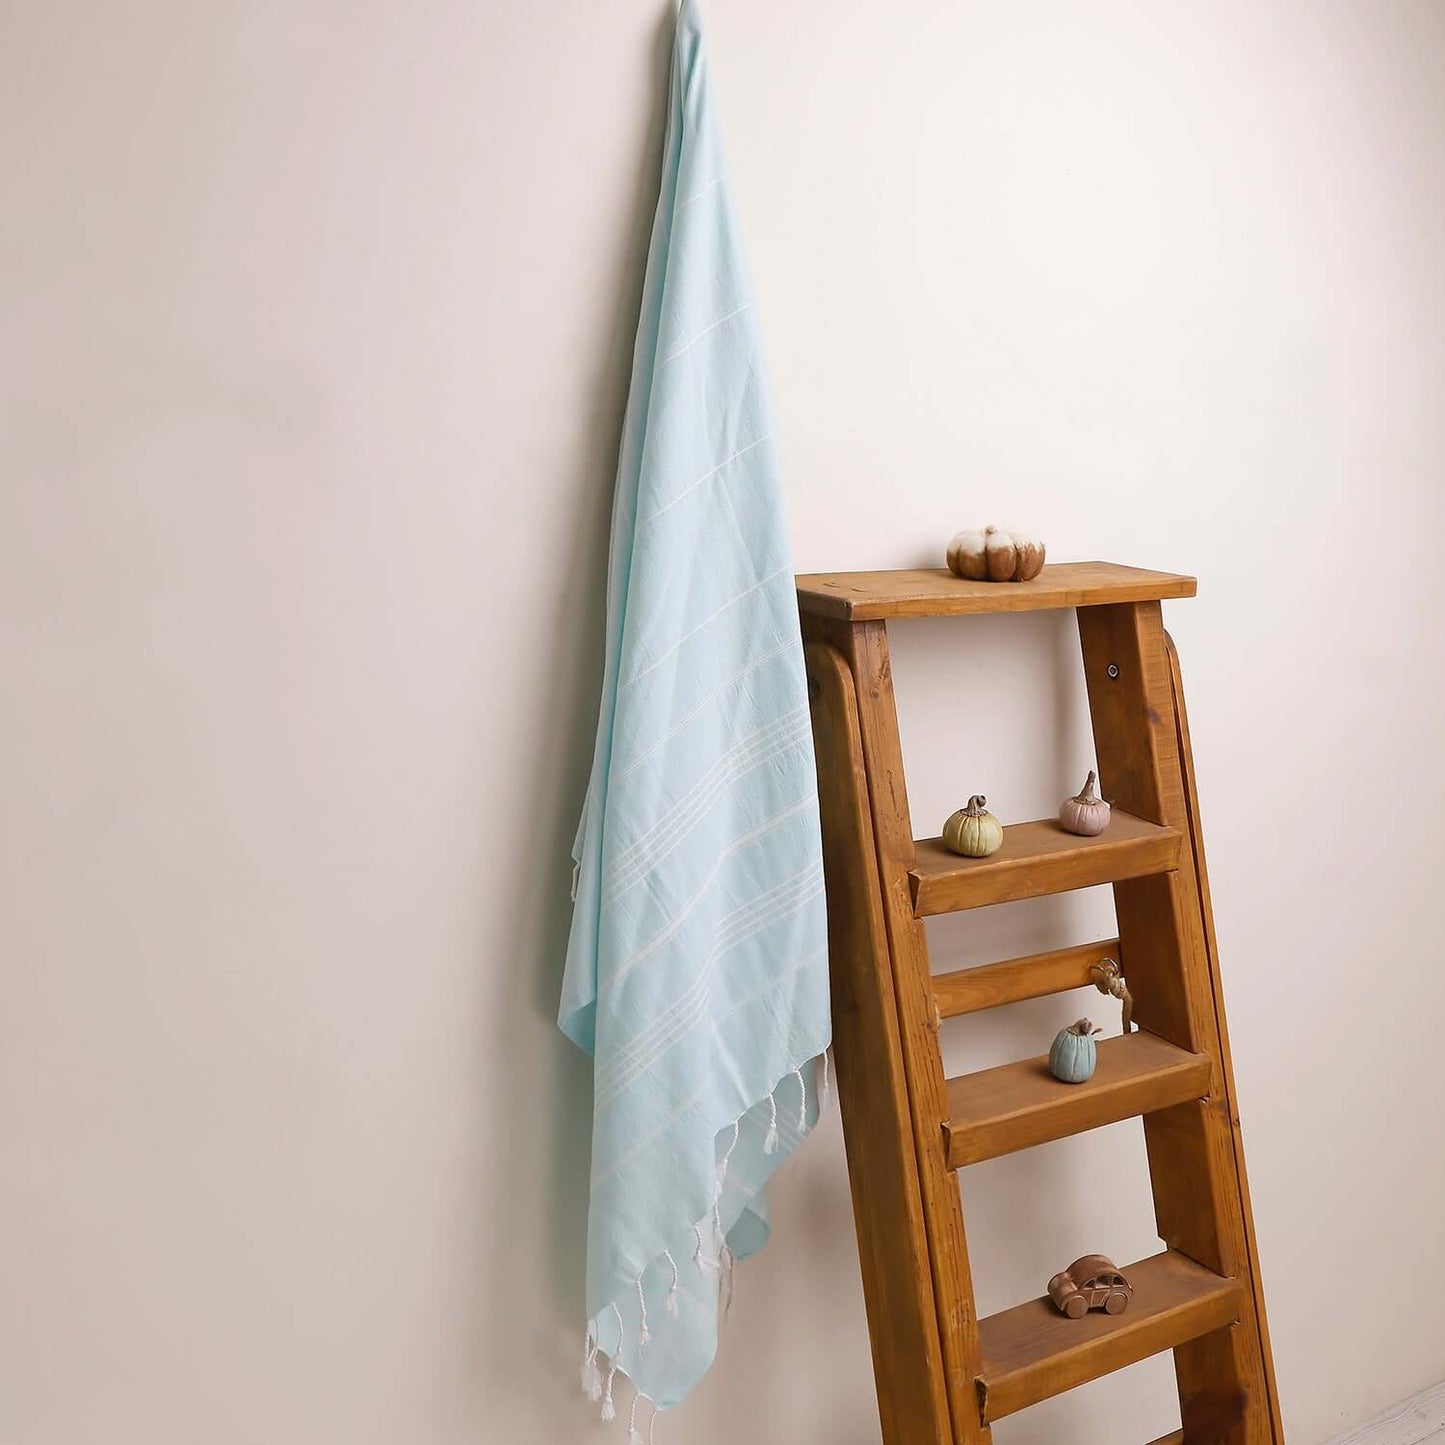 Loom Legacy aqua striped beach towel with tassels, draped over a wooden ladder beside small decorative items on the shelves.